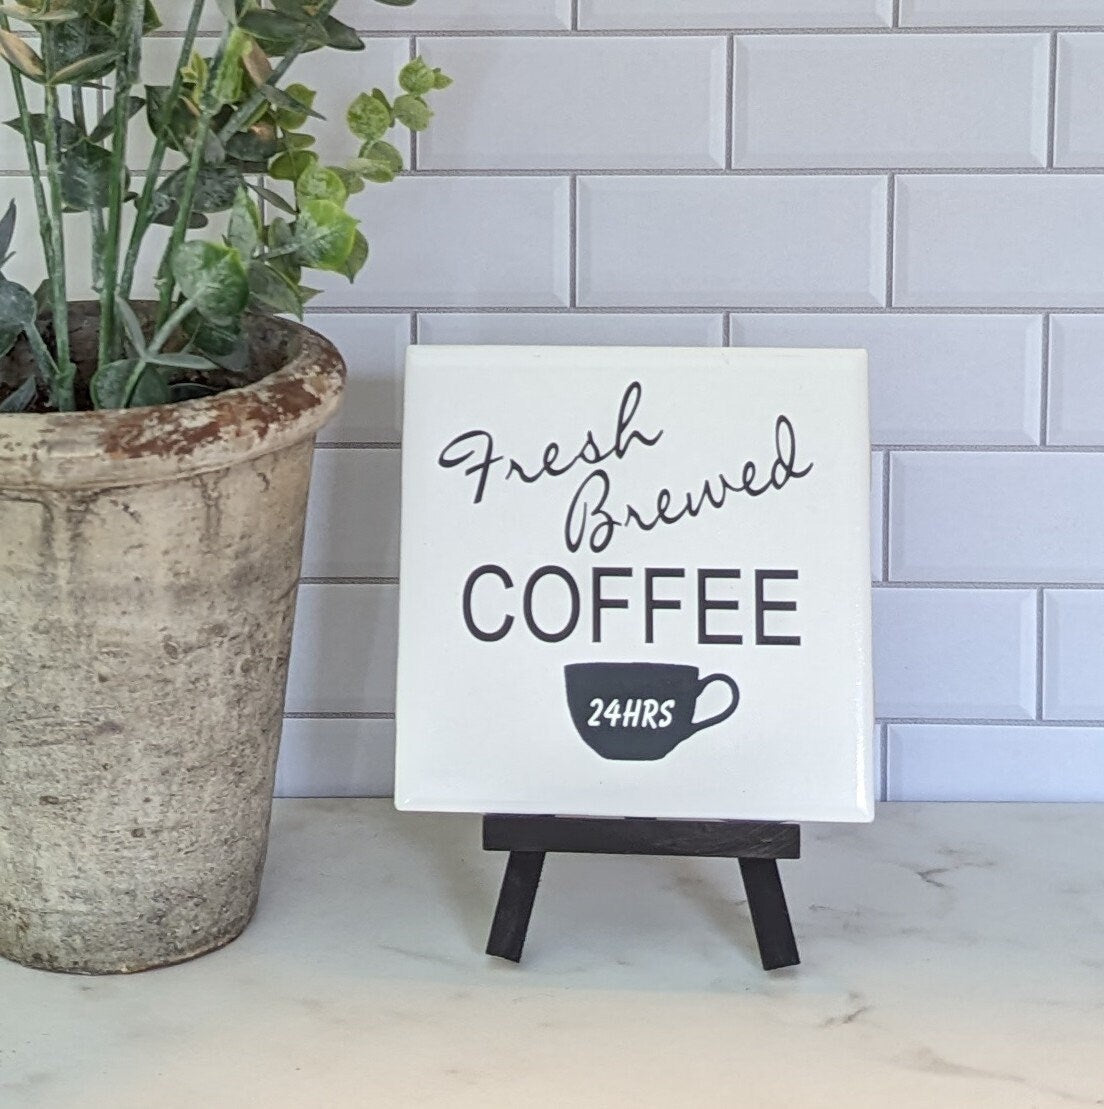 If you love me you'll bring me coffee sign, easel sign, fresh brewed c –  Bay Leaf Door